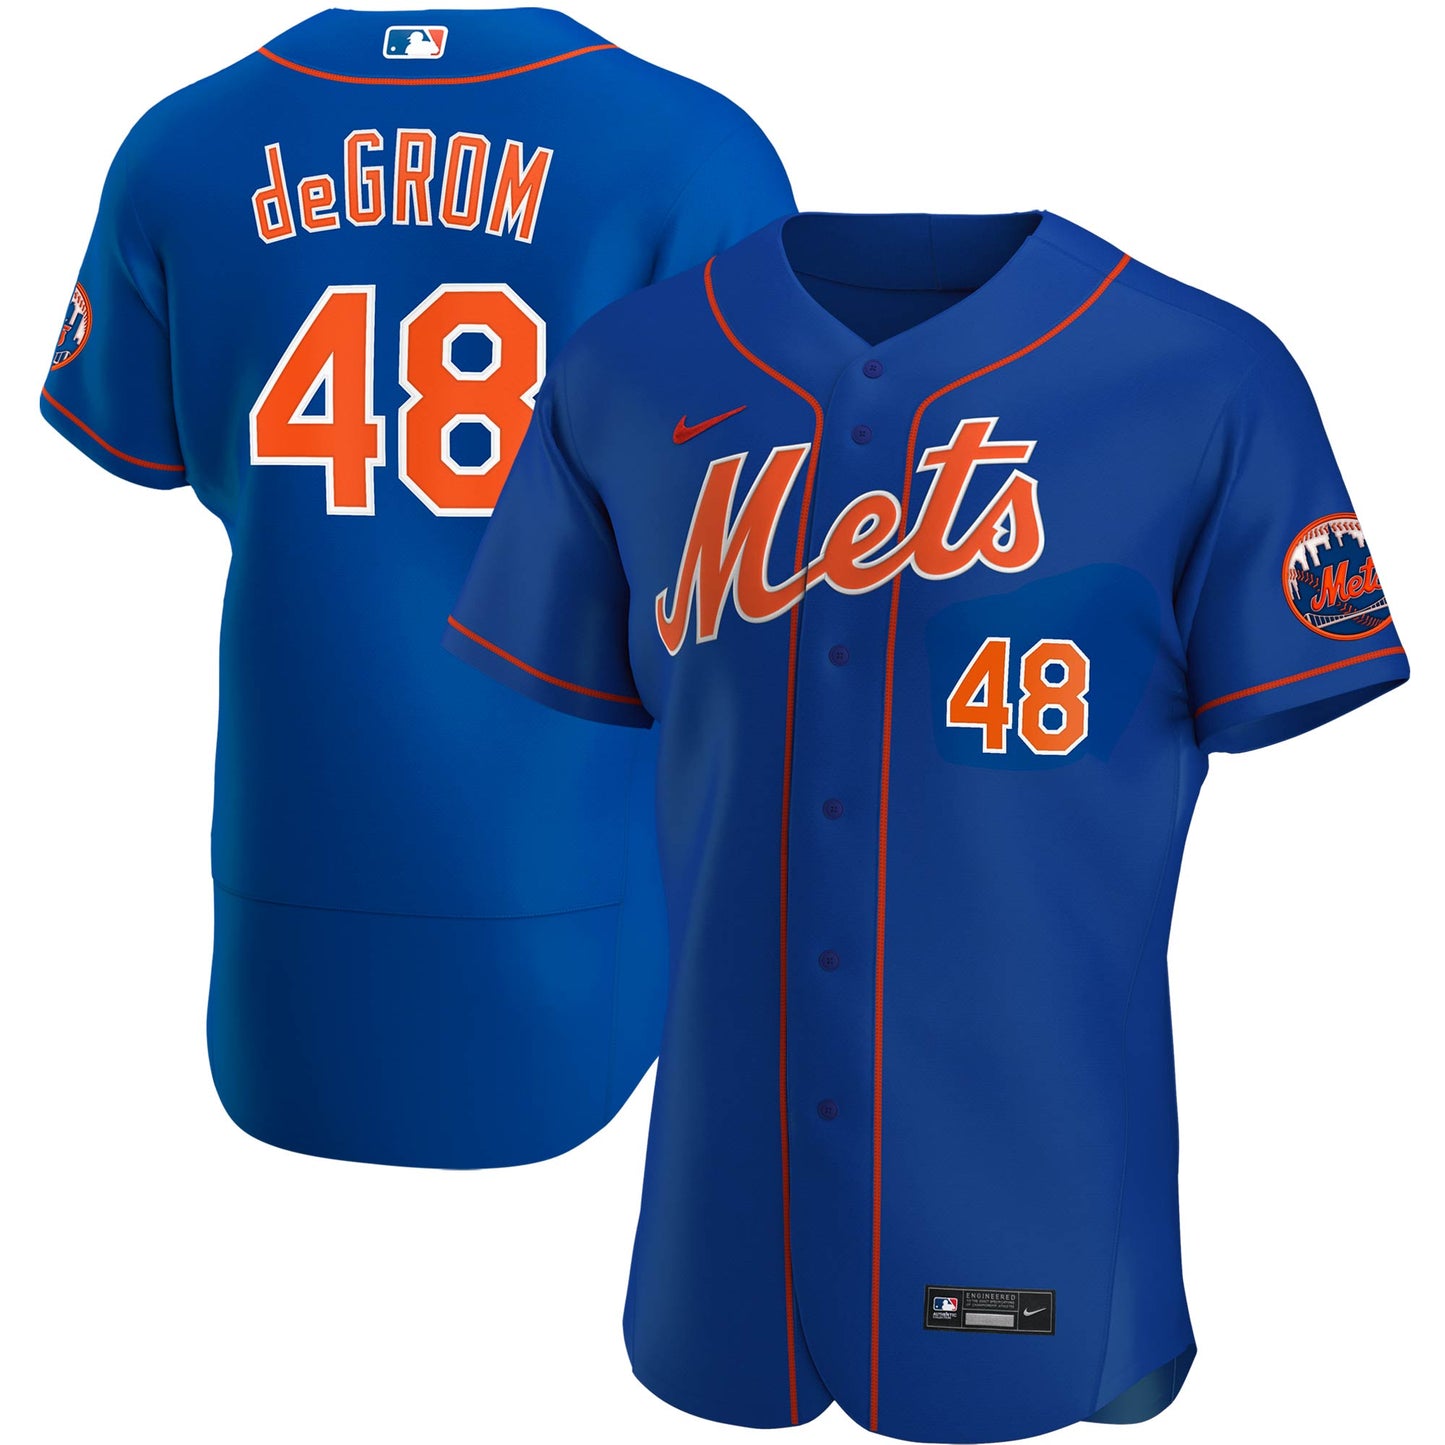 Men's Nike Jacob deGrom Royal New York Mets Alternate Authentic Player Jersey